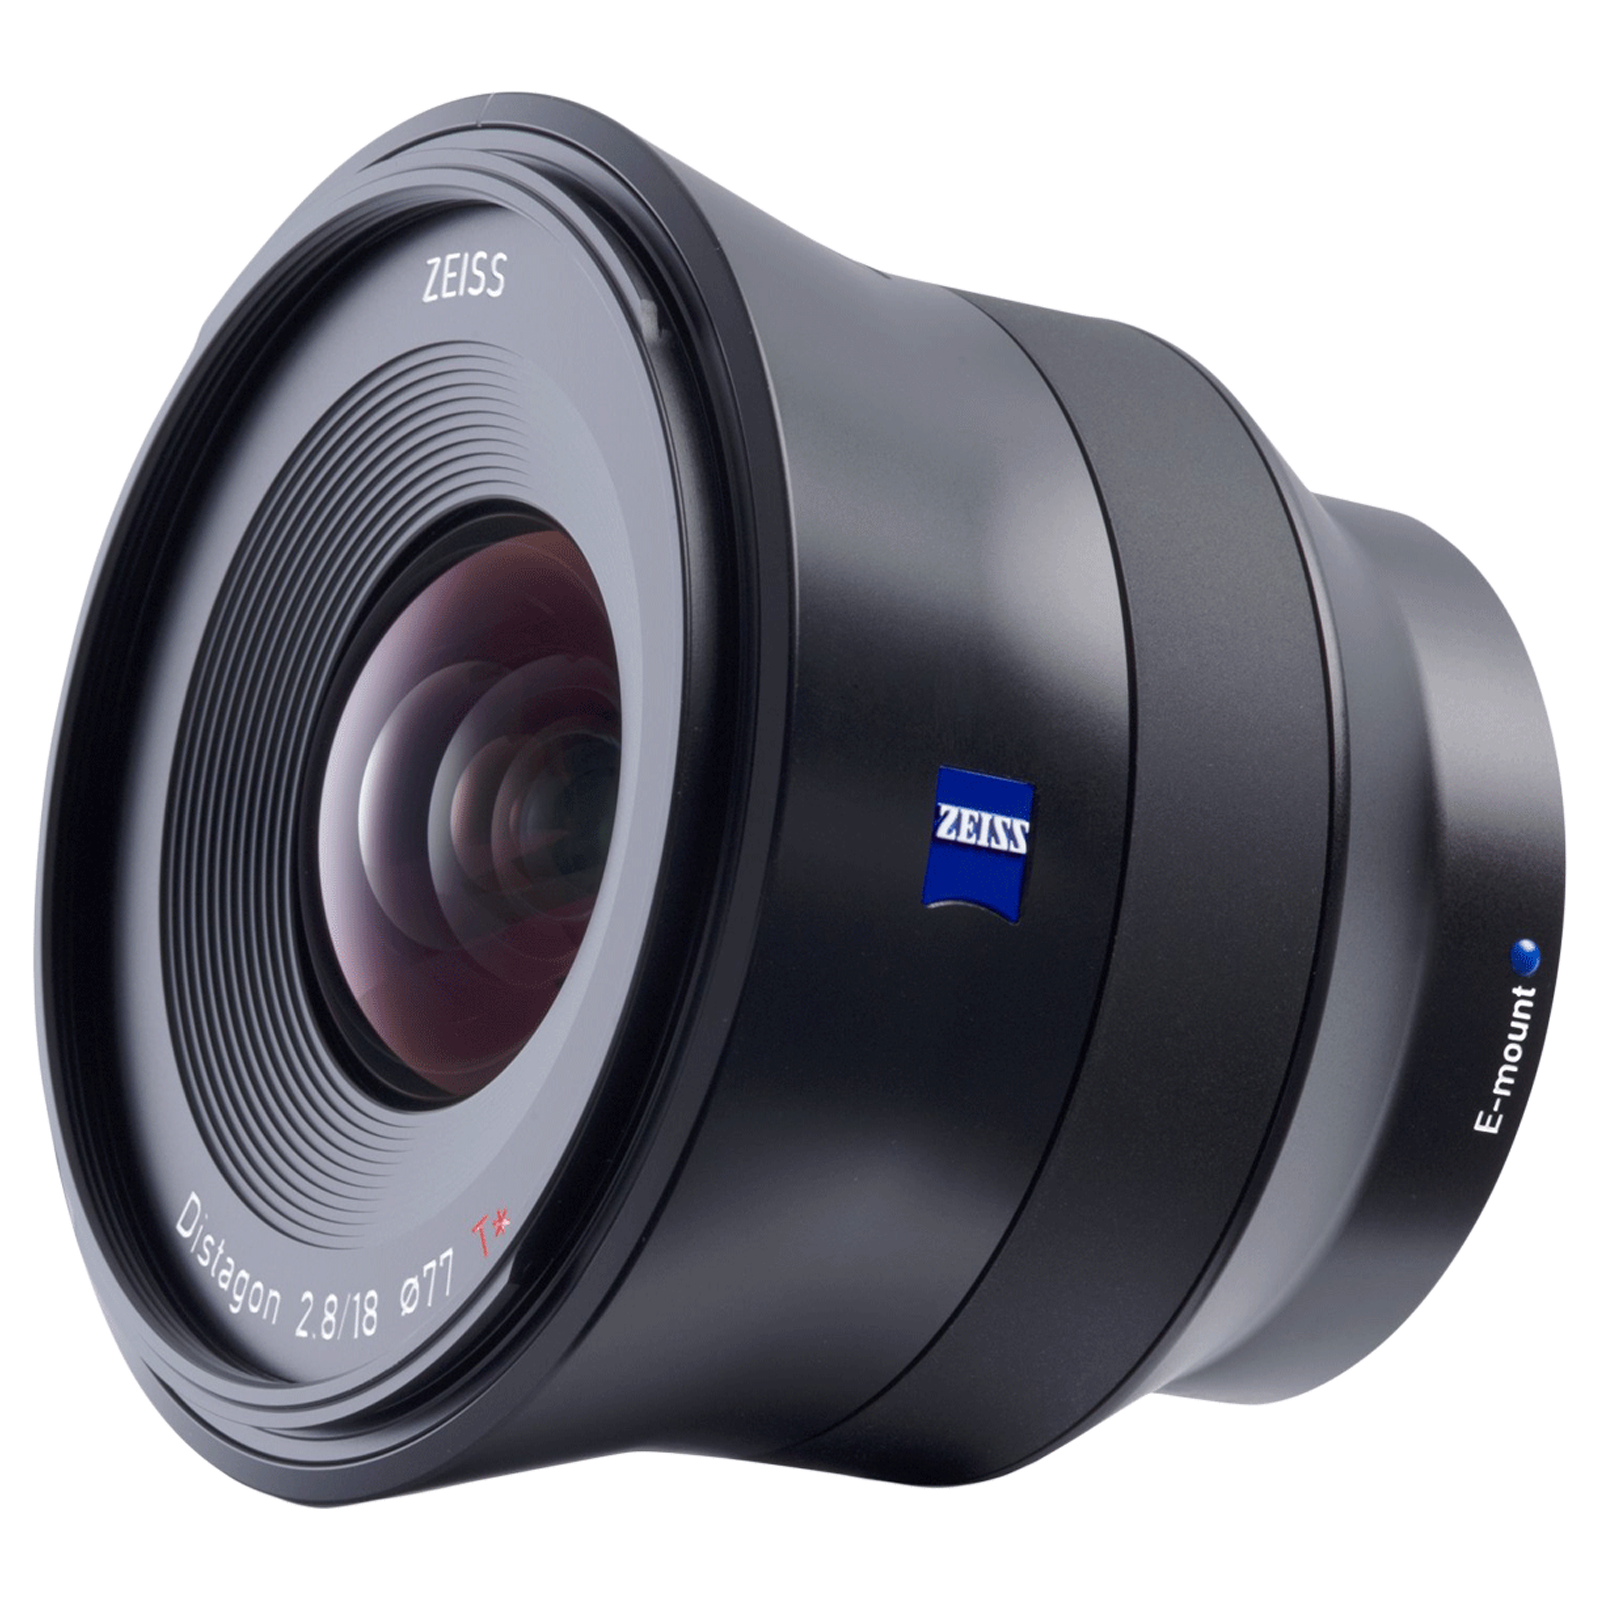 Carl Zeiss Batis 18mm f/2.8 - f/22 Wide Angle Lens (Auto Focus and OLED Display, 000000-2136-691, Black)